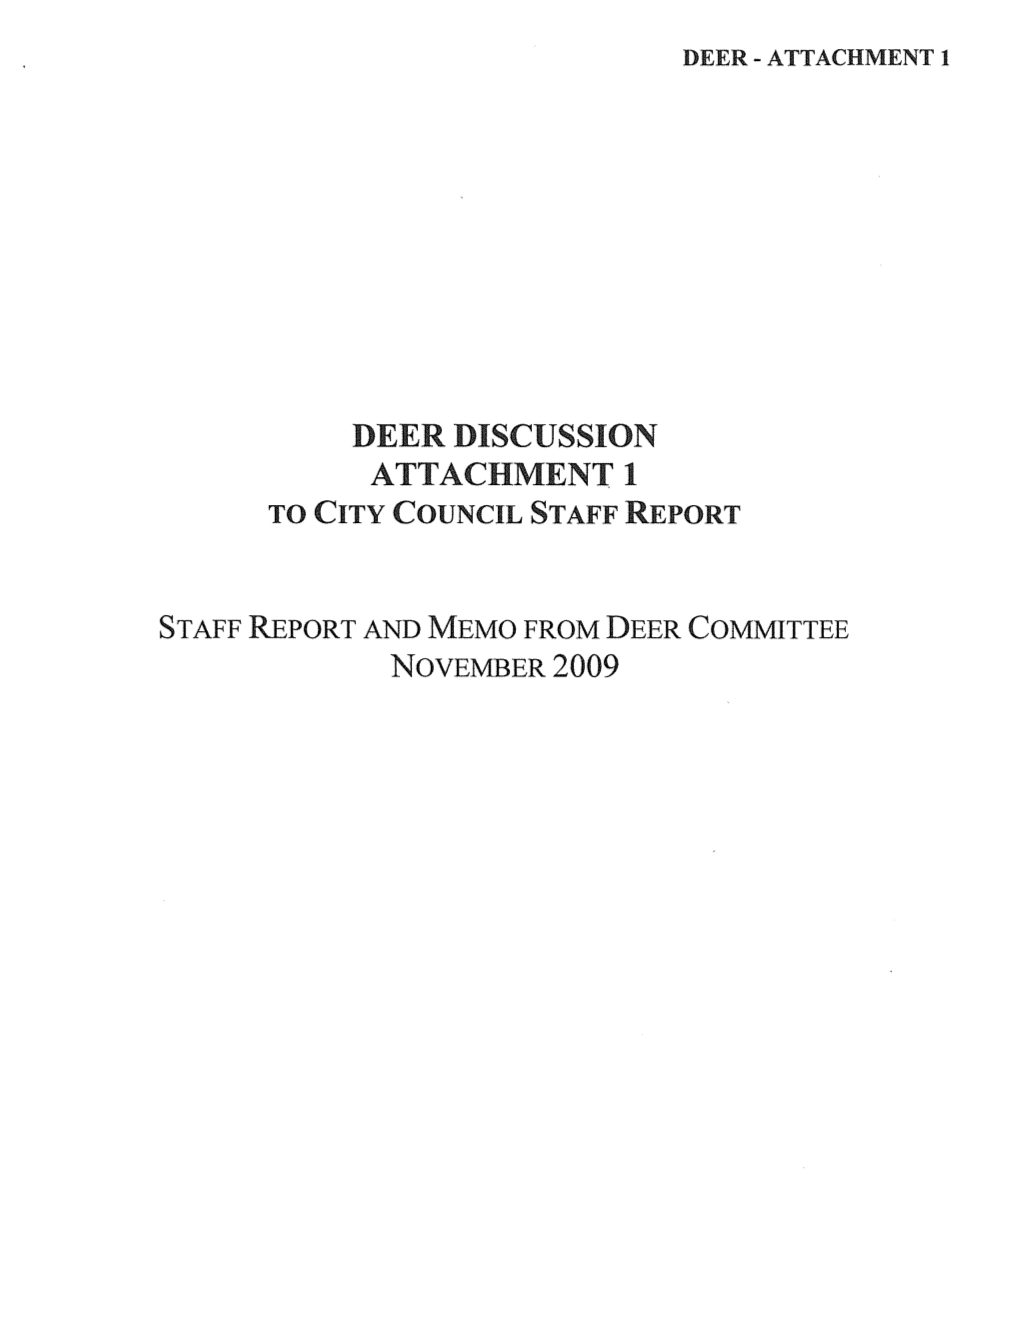 Deer Discussion Attachment 1 to City Council Staff Report